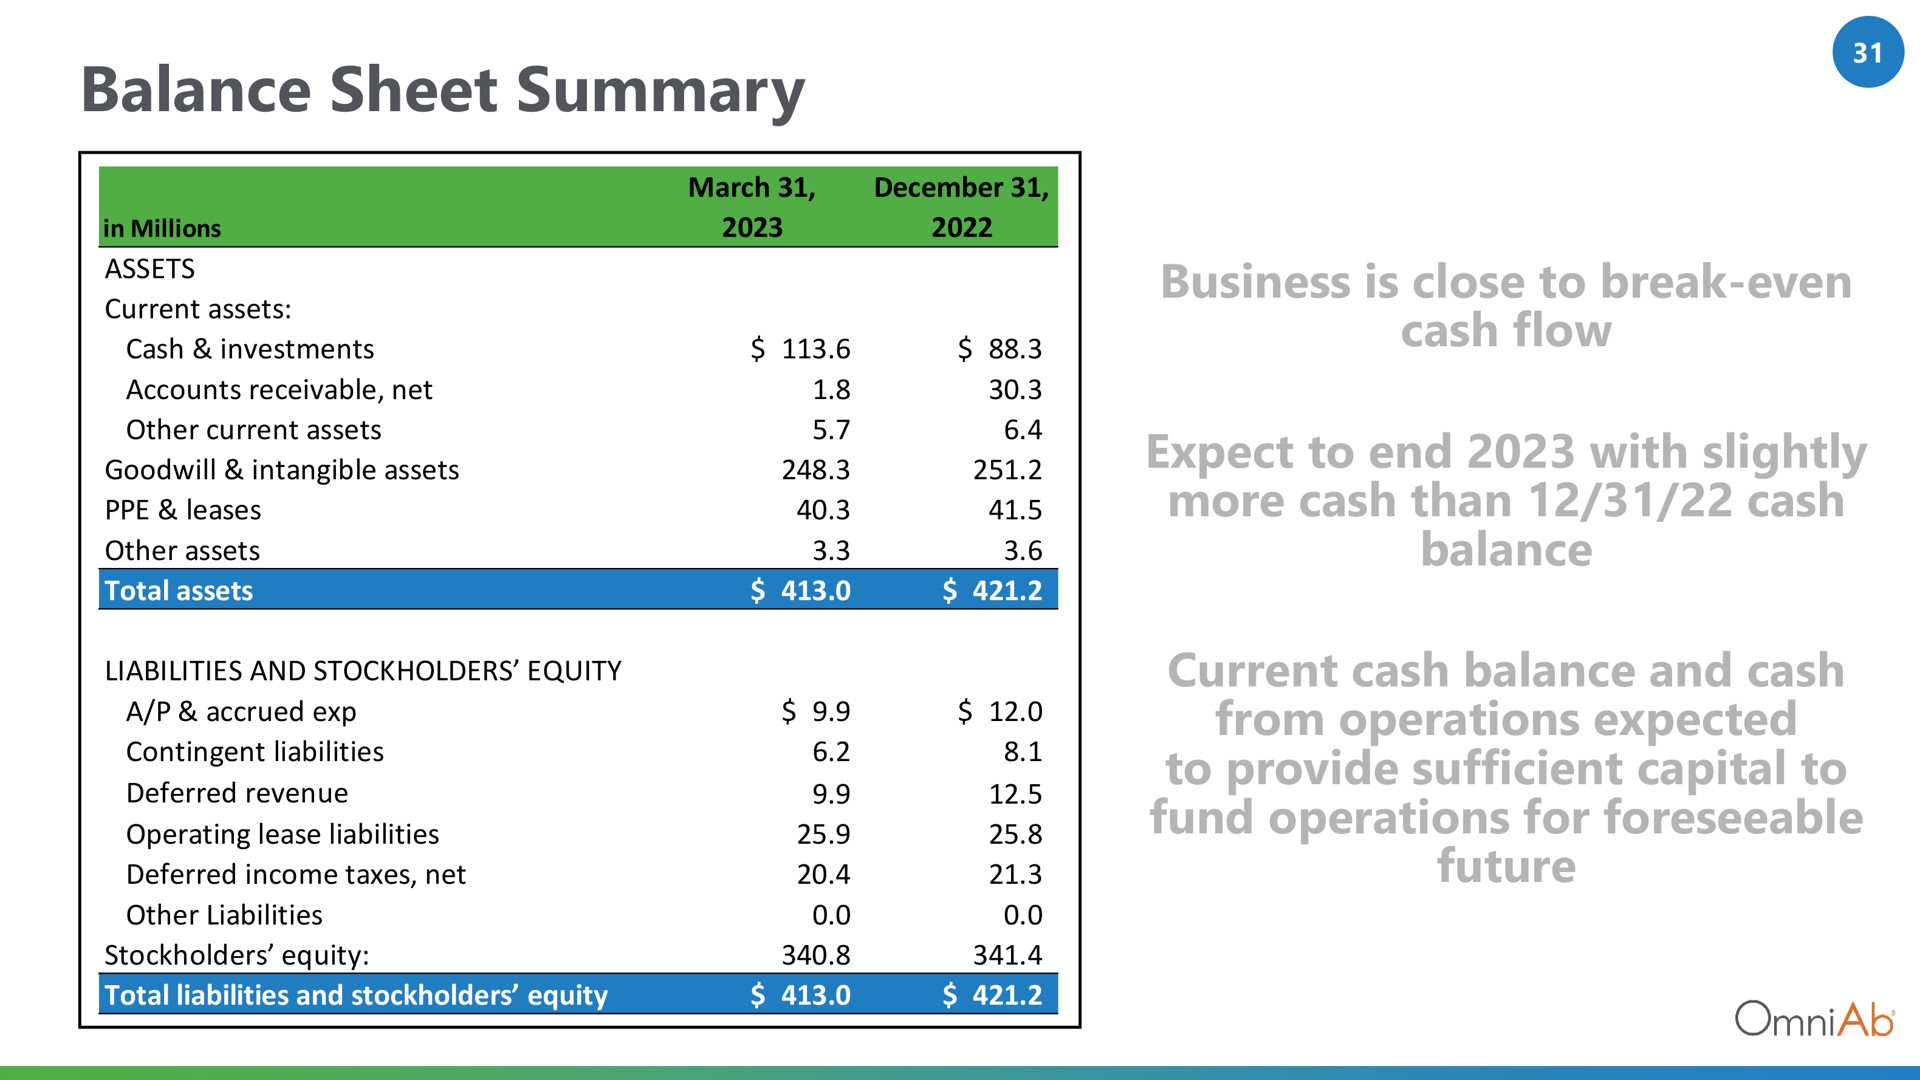 balance sheet summary business is close to break even cash flow expect to end with slightly more cash than cash balance current cash balance and cash from operations expected to provide sufficient capital to fund operations for foreseeable future leases | OmniAb